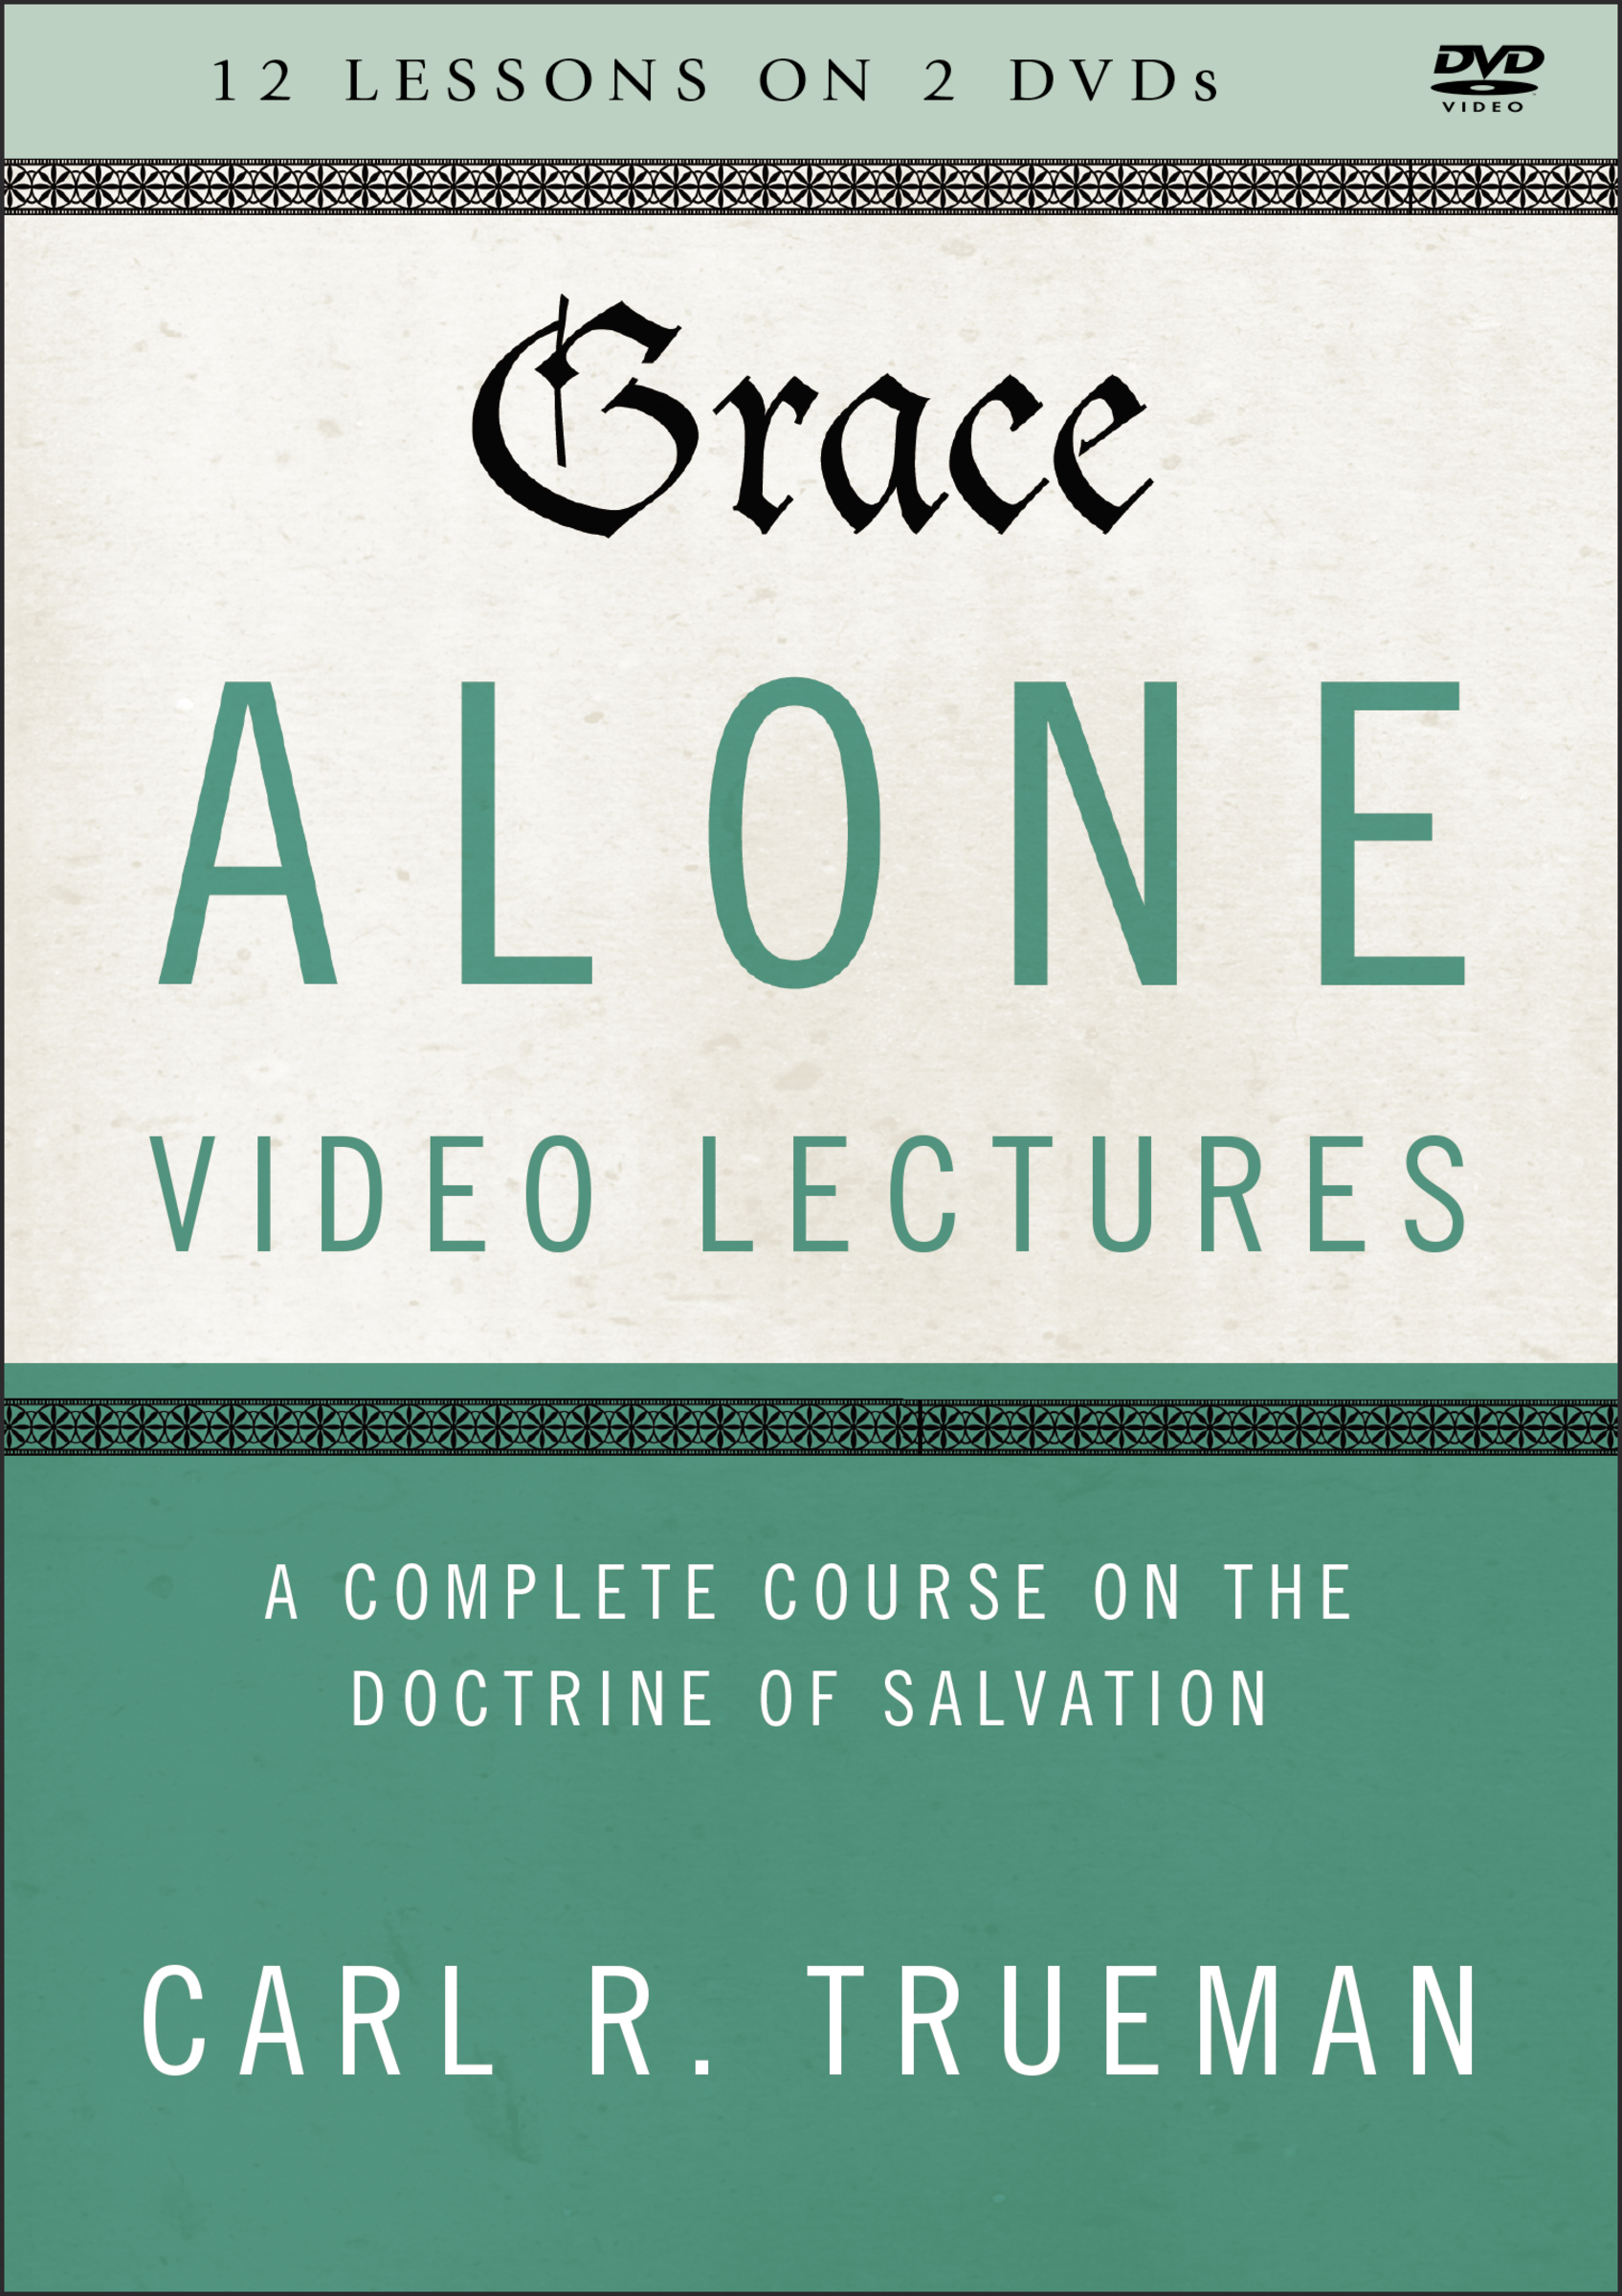 Grace Alone Video Lectures